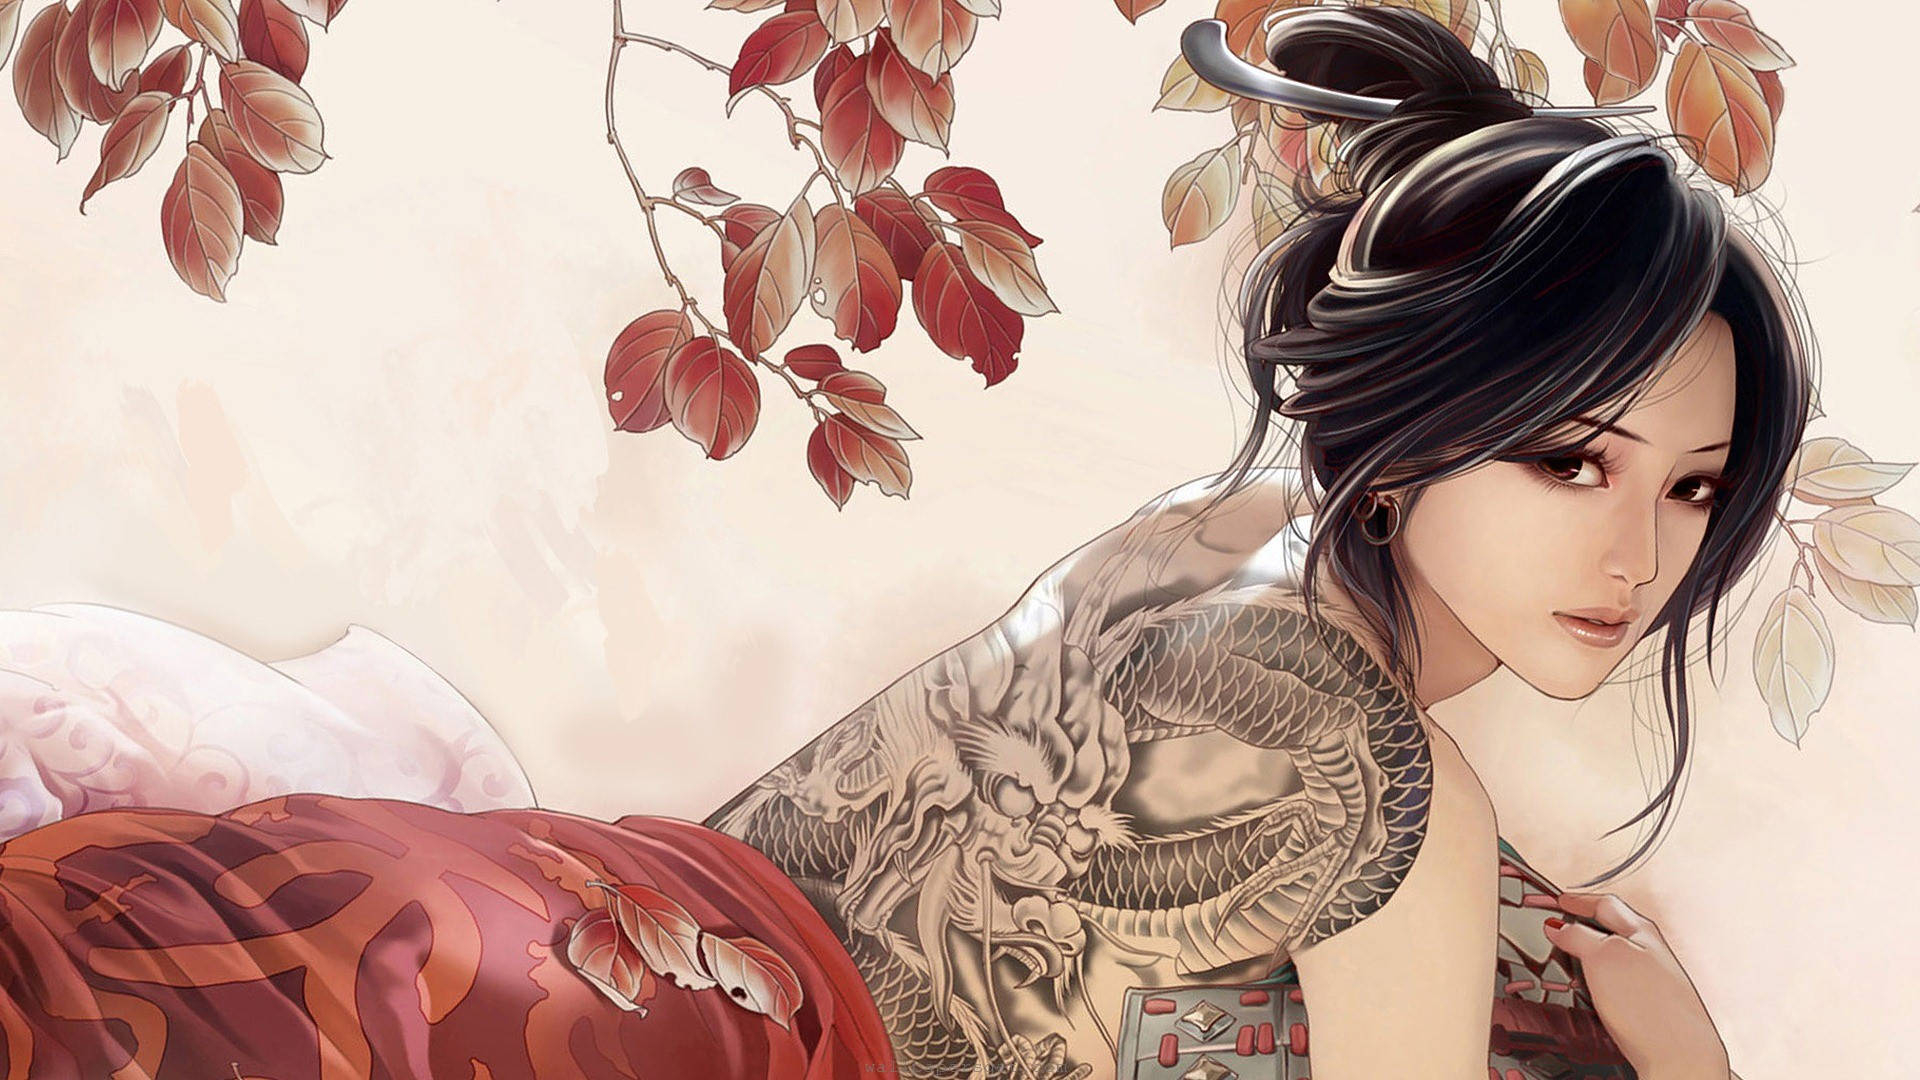 1920x1080 Download Anime Girl With Tattoo Wallpaper